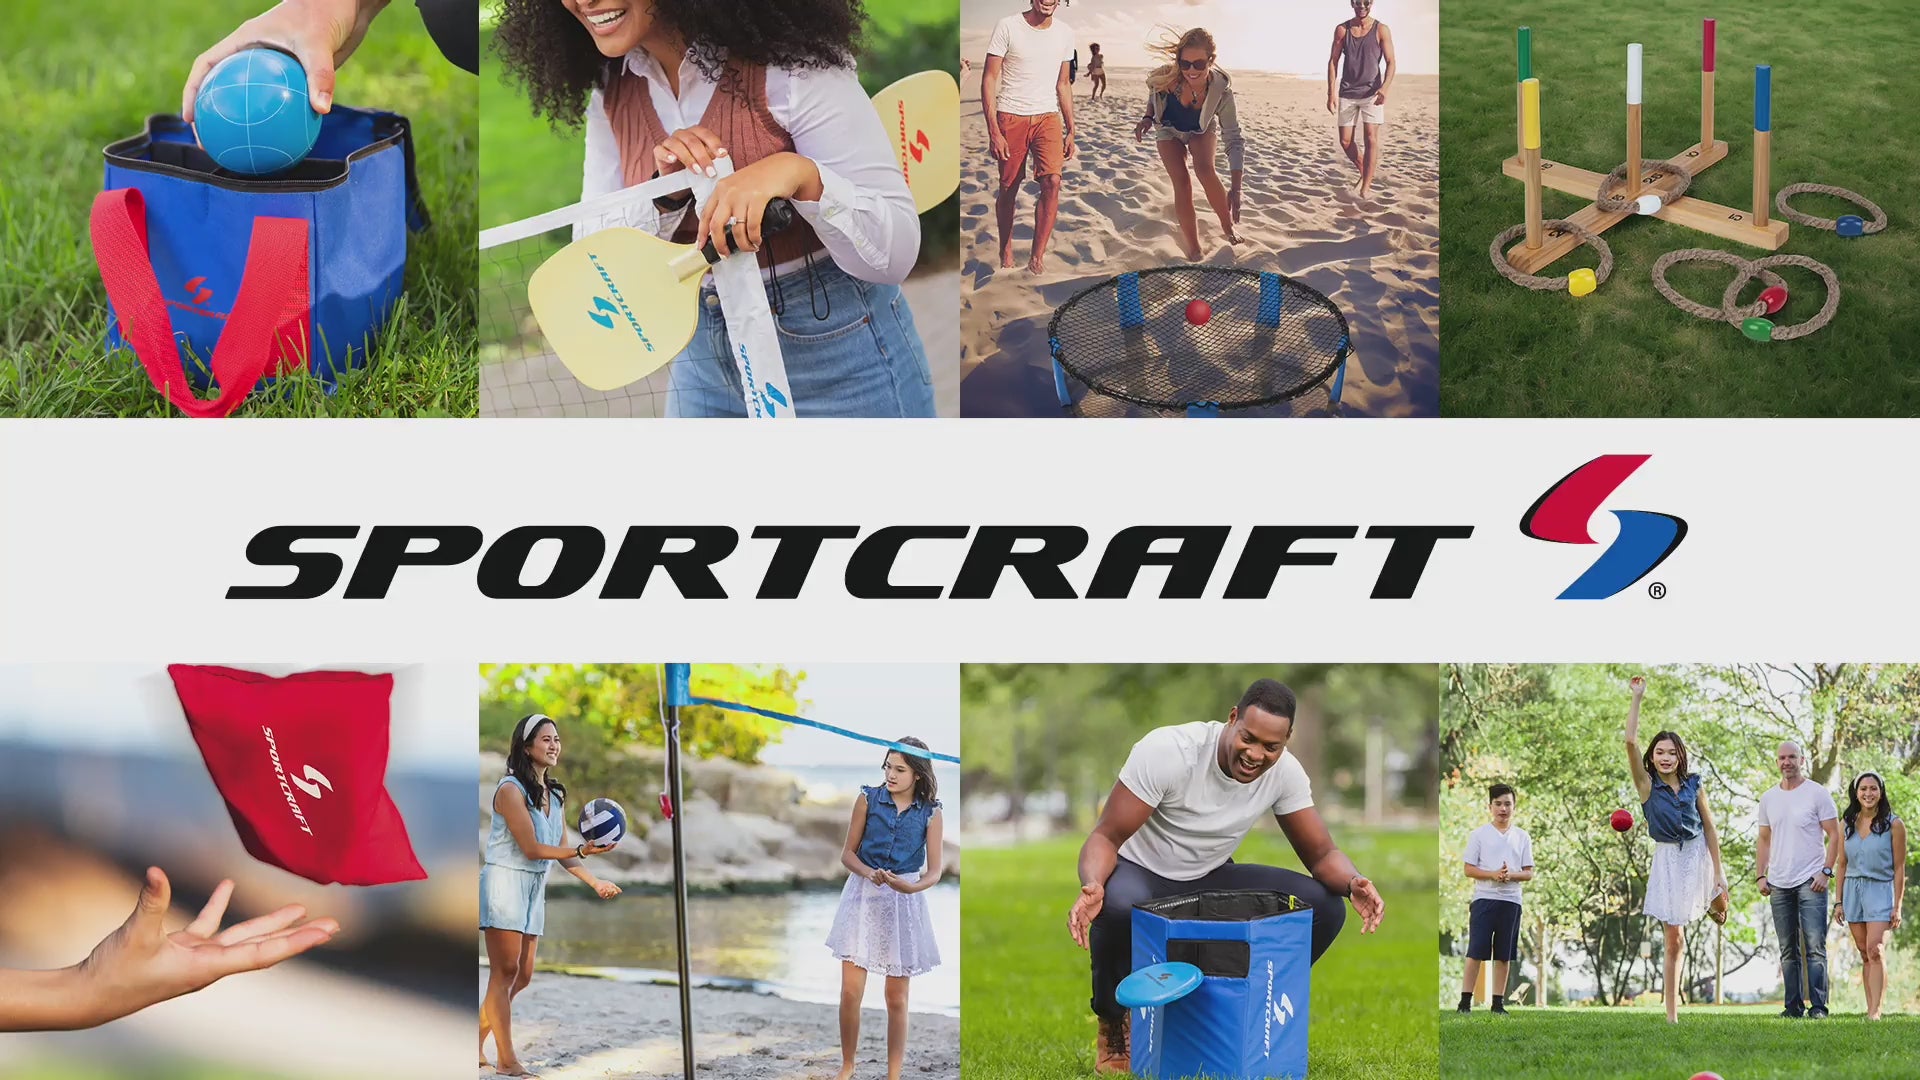 Load video: Sportcraft introduction video